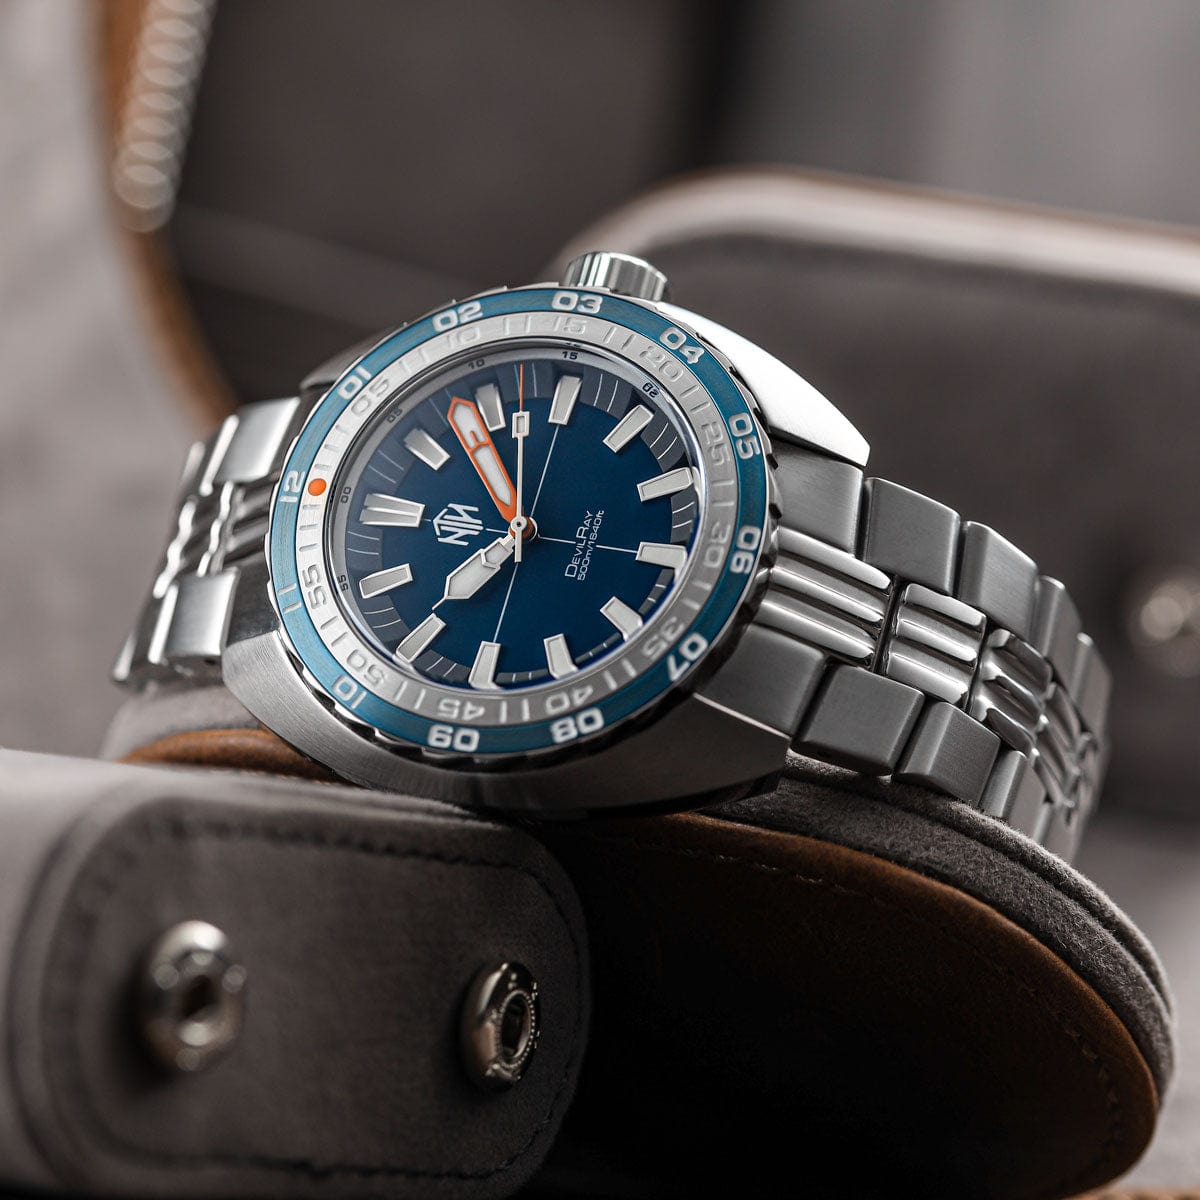 NTH DevilRay Dive Watch - Blue - WatchGecko Exclusive - LIKE NEW